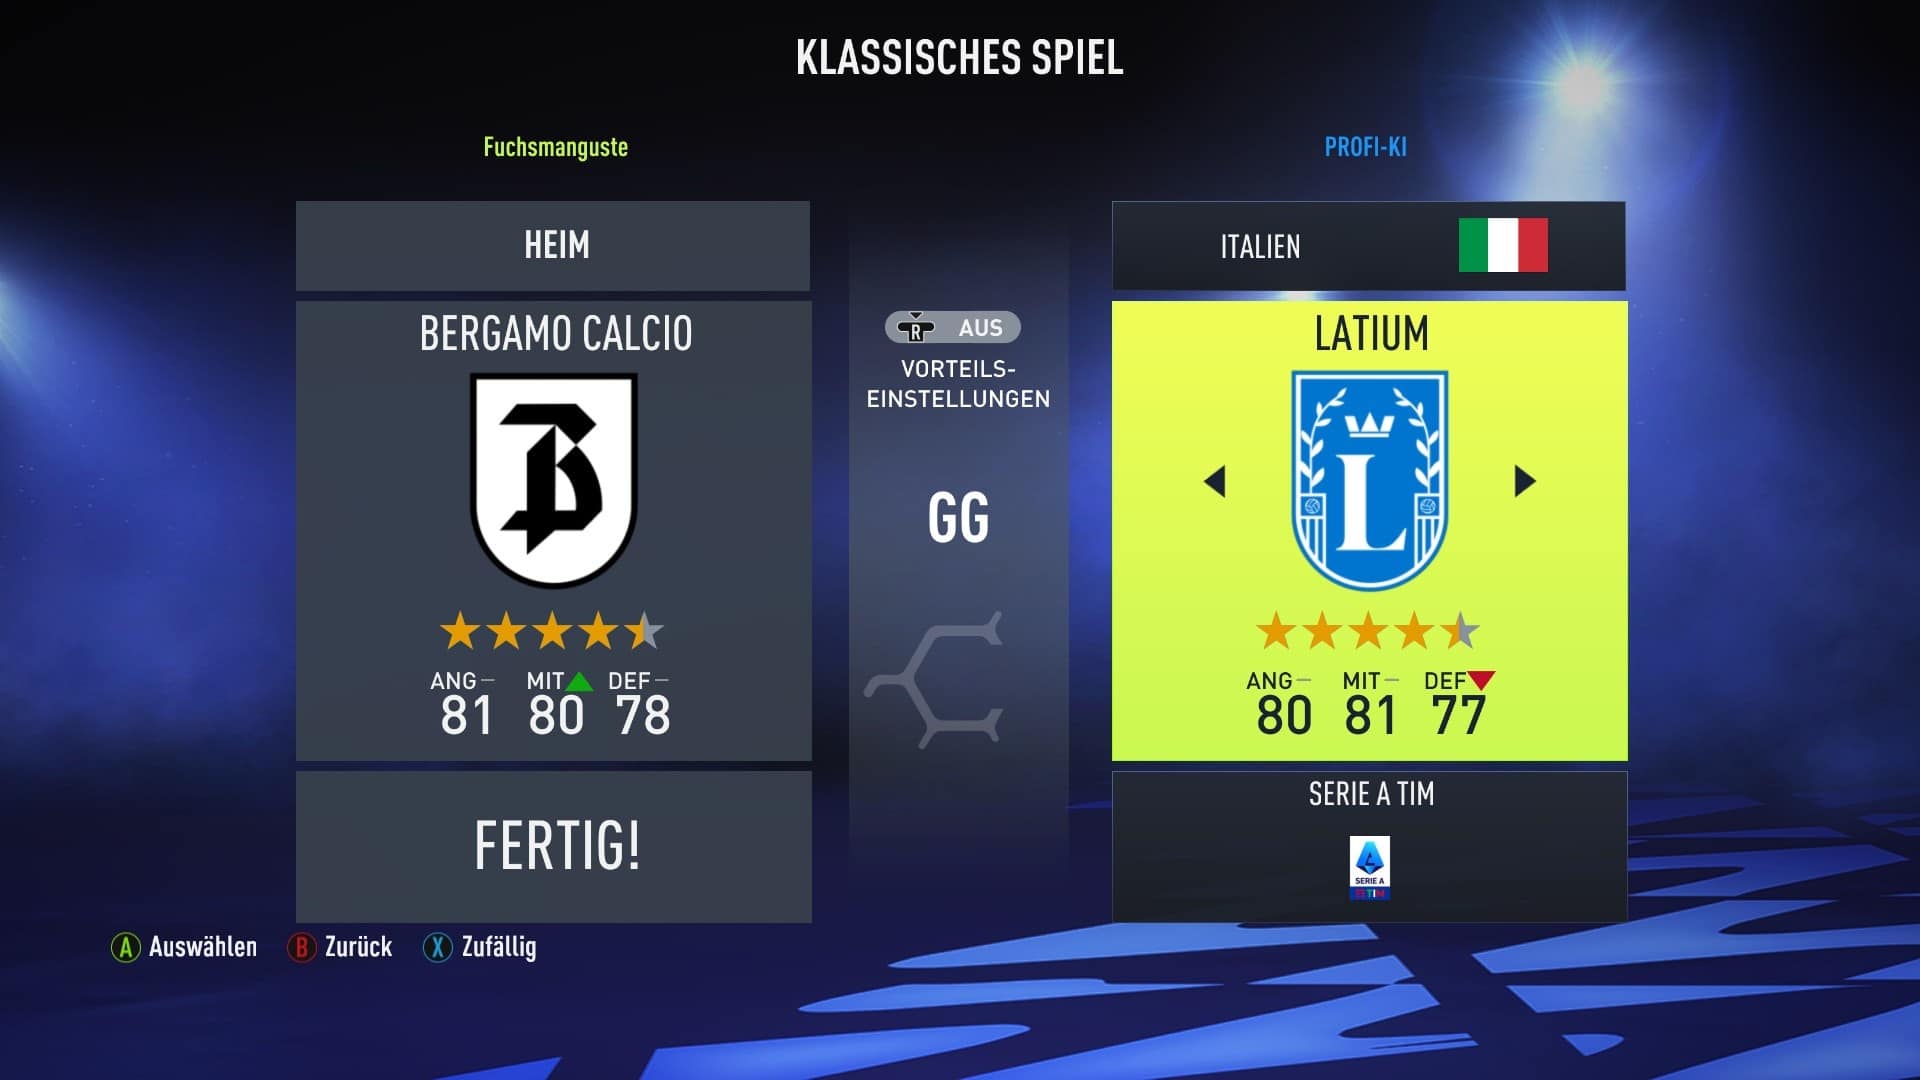 Team fade in Serie A: Atalanta Bergamo and Lazio Roma are no longer included in FIFA with their real names and crests.